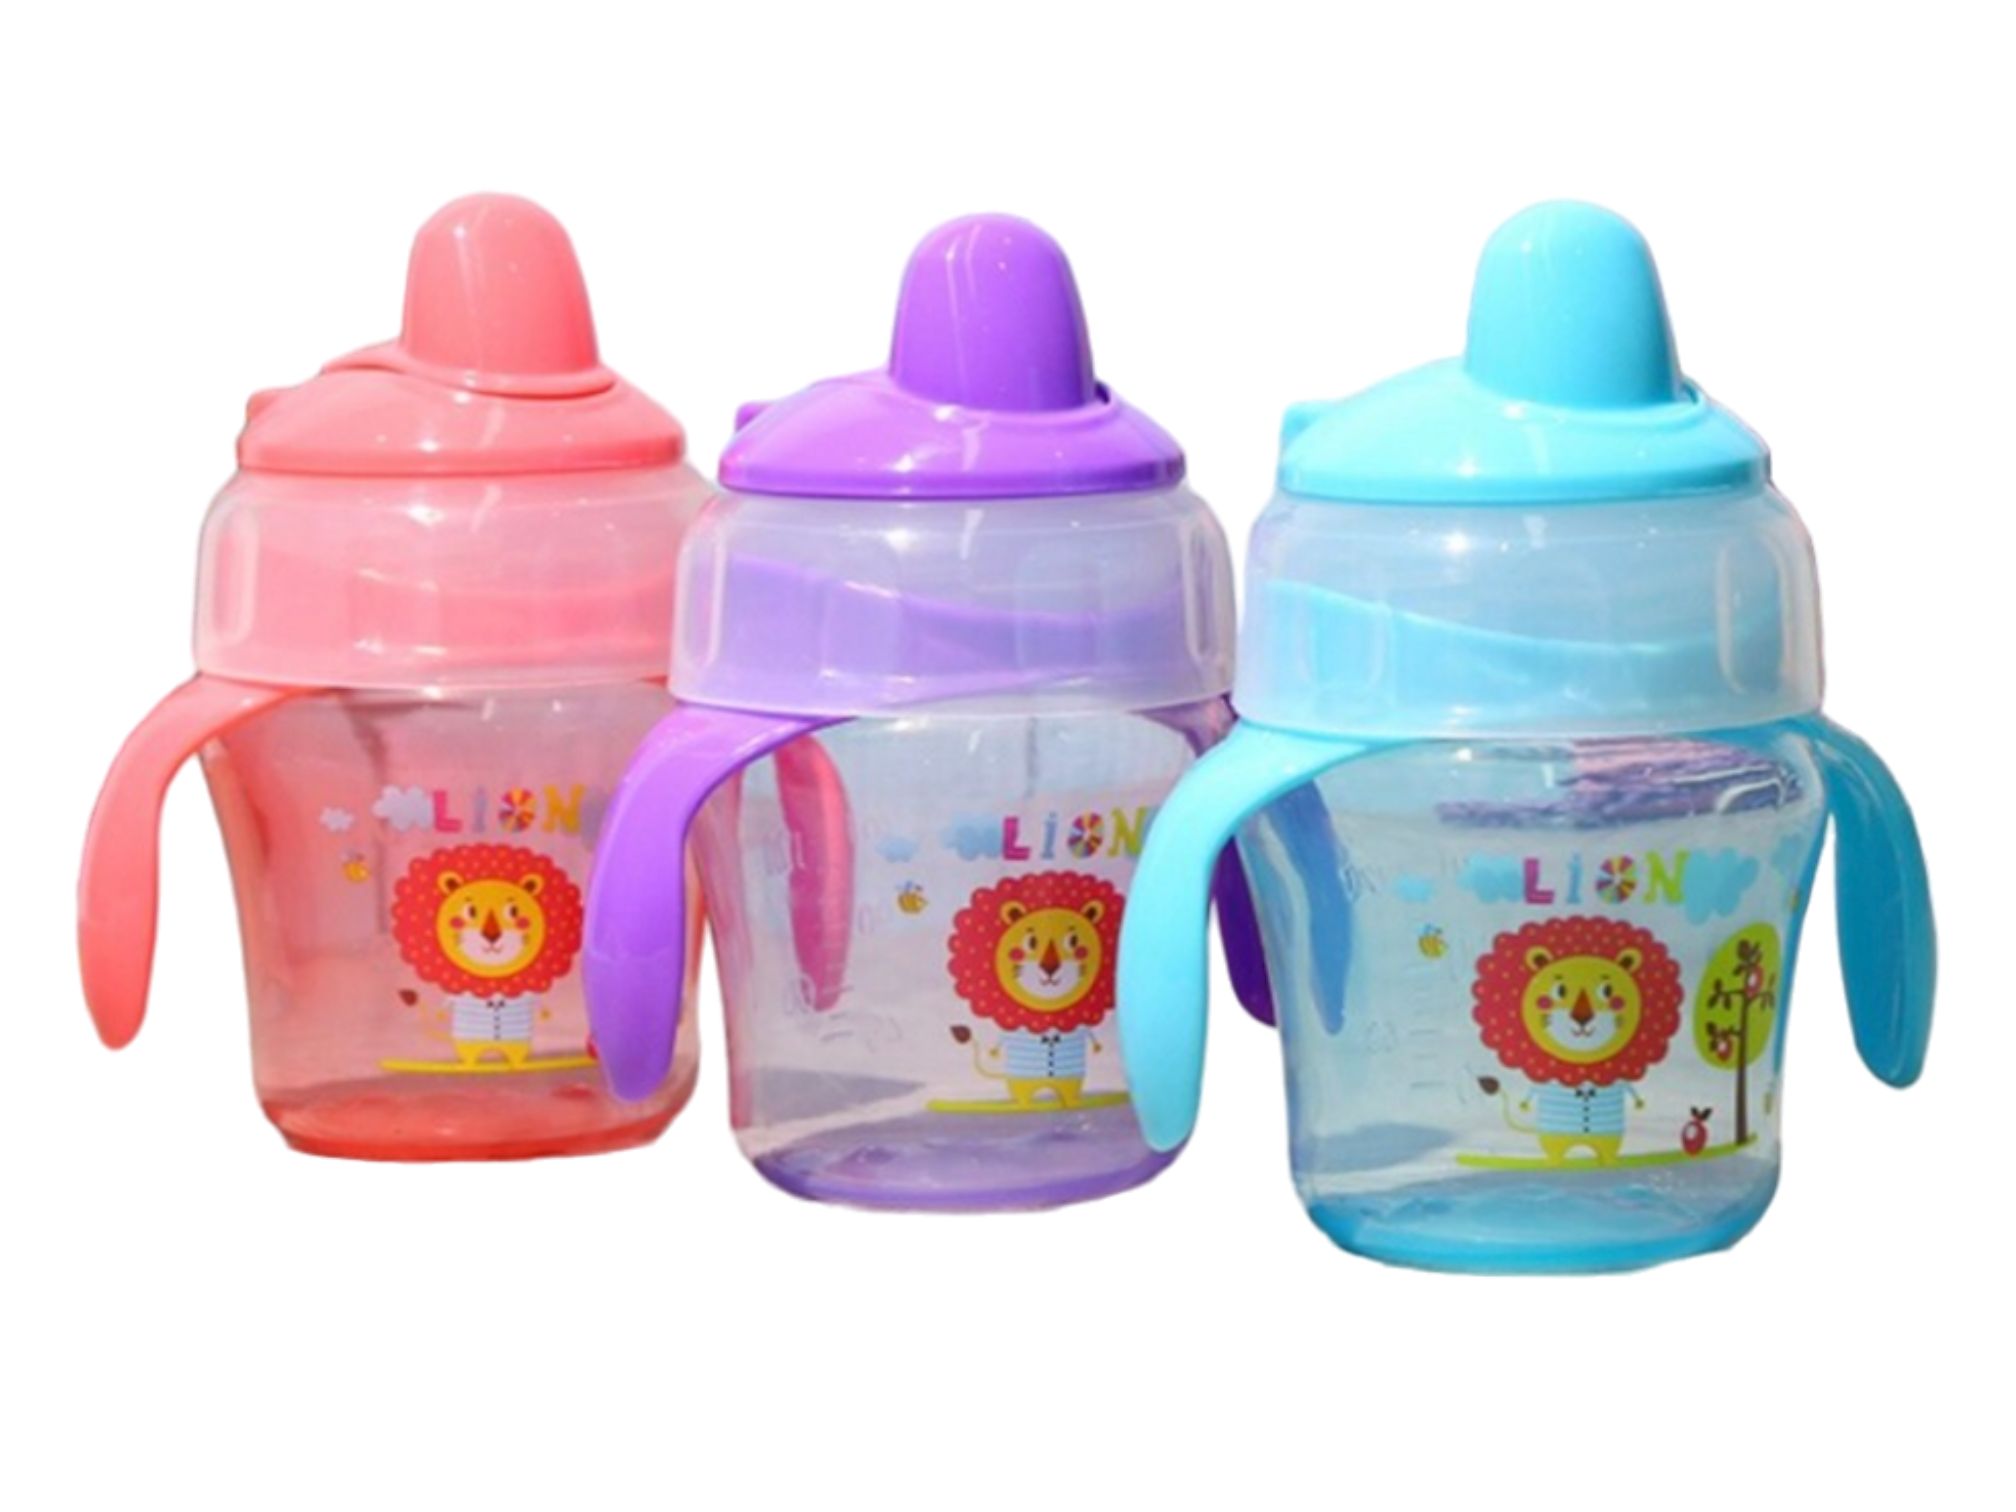 Momlove Drinking Cup 120ml